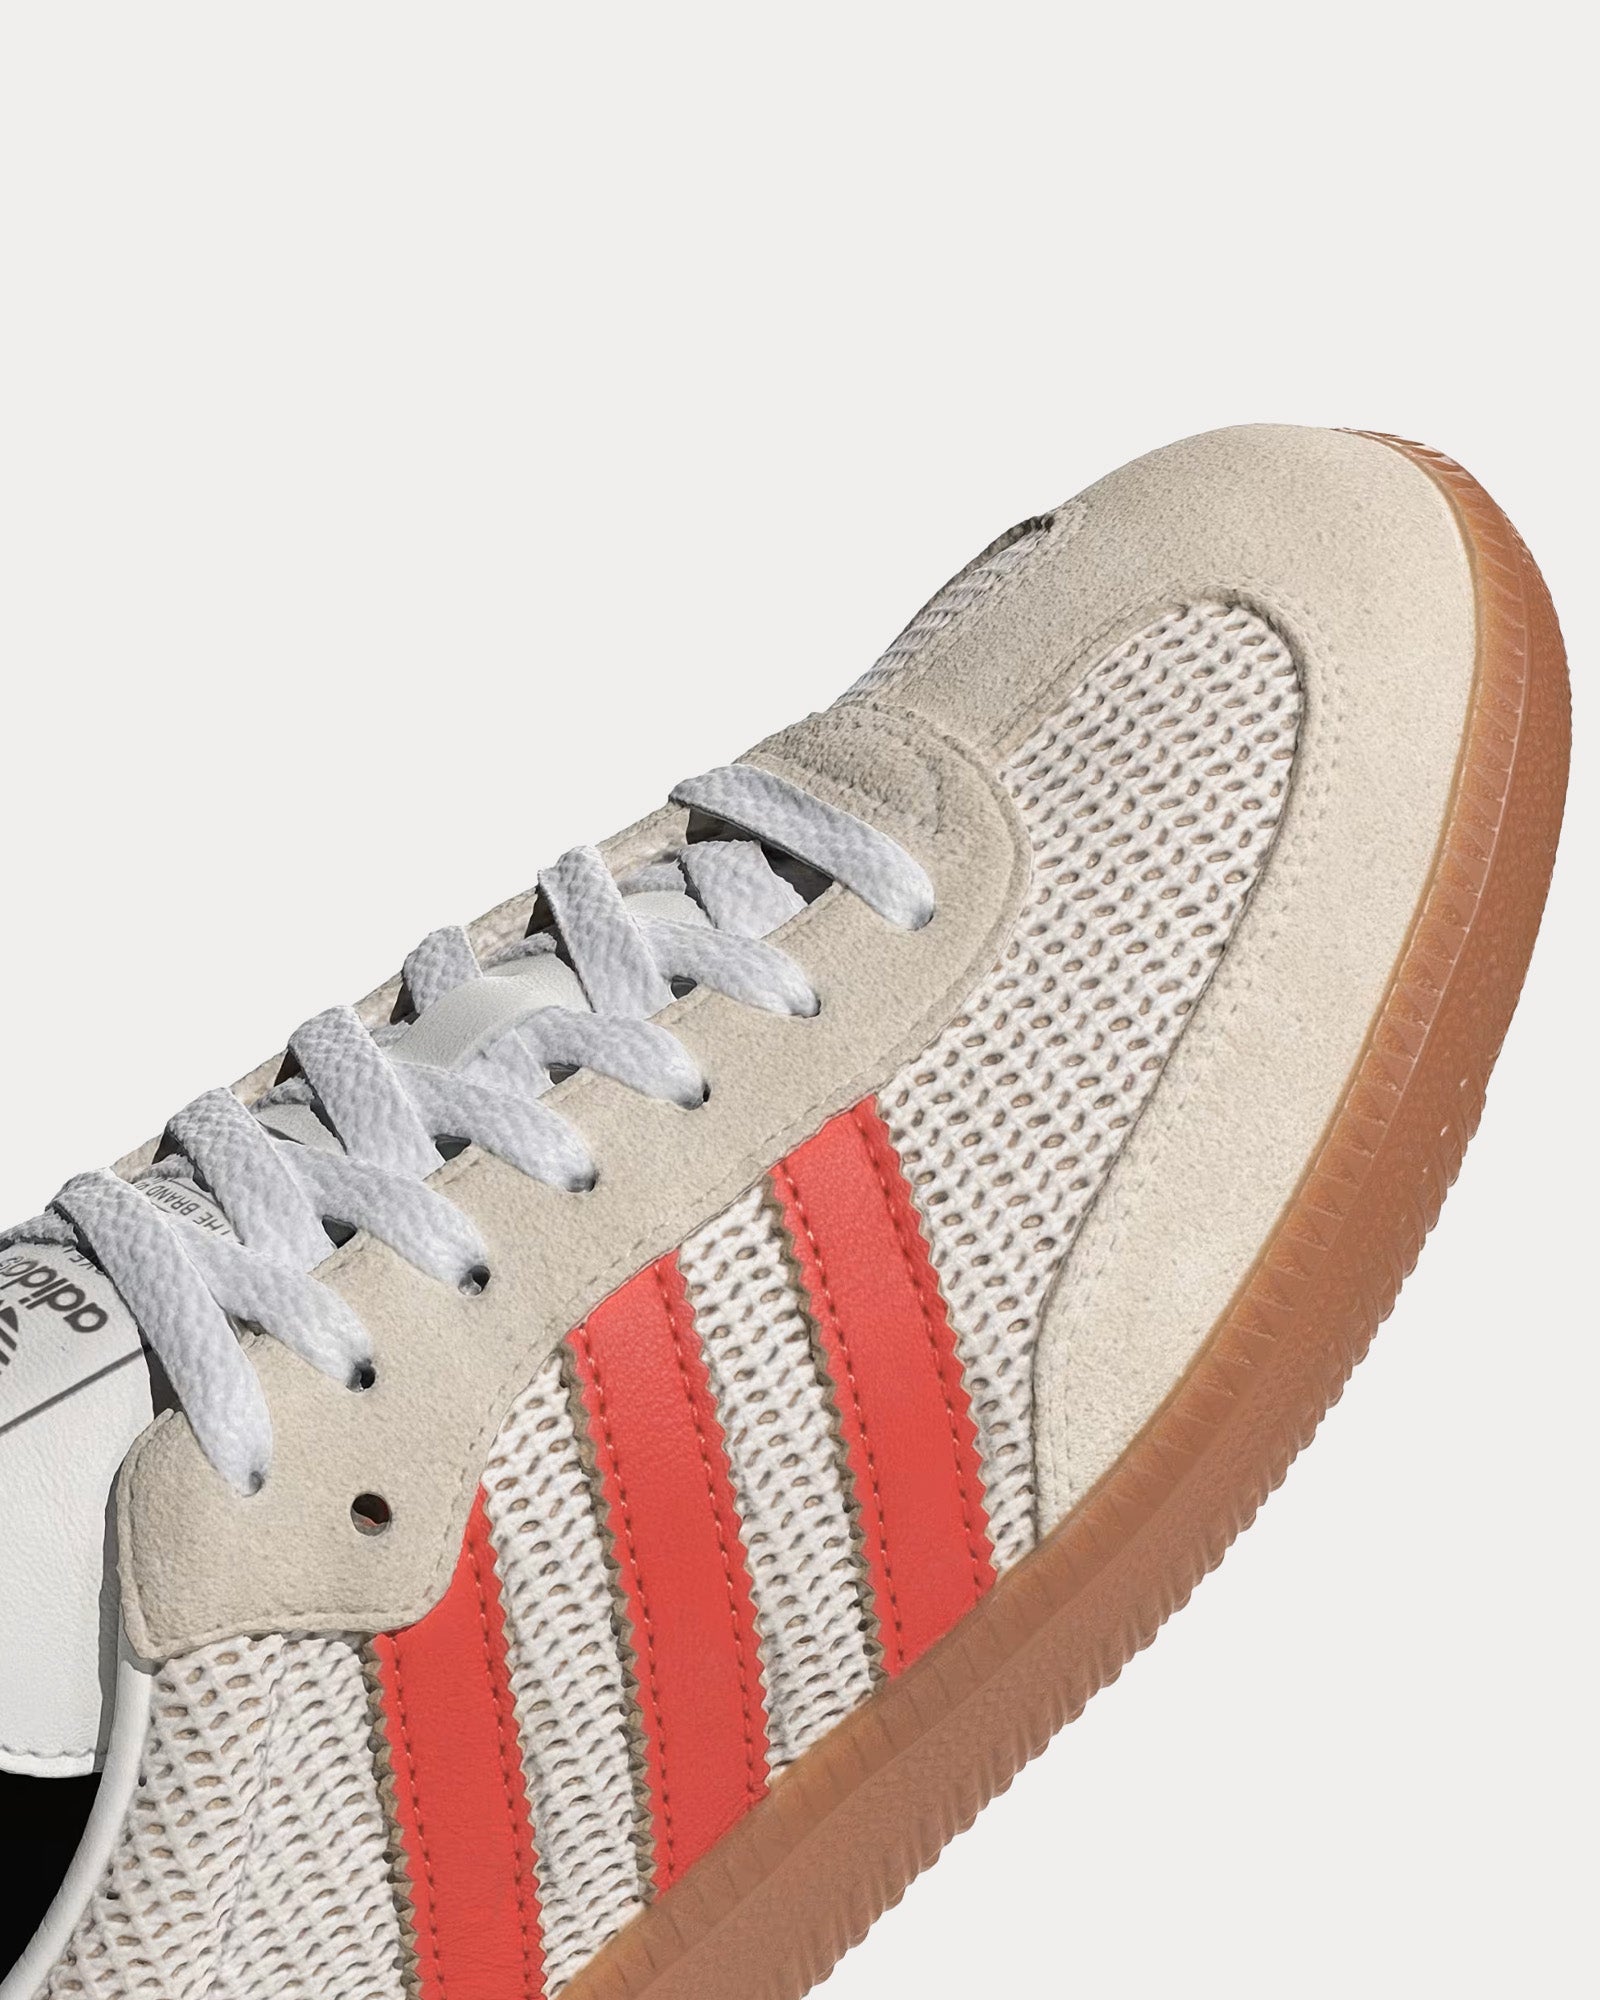 Adidas - Samba OG Crystal White / Preloved Red / Gum Low Top Sneakers